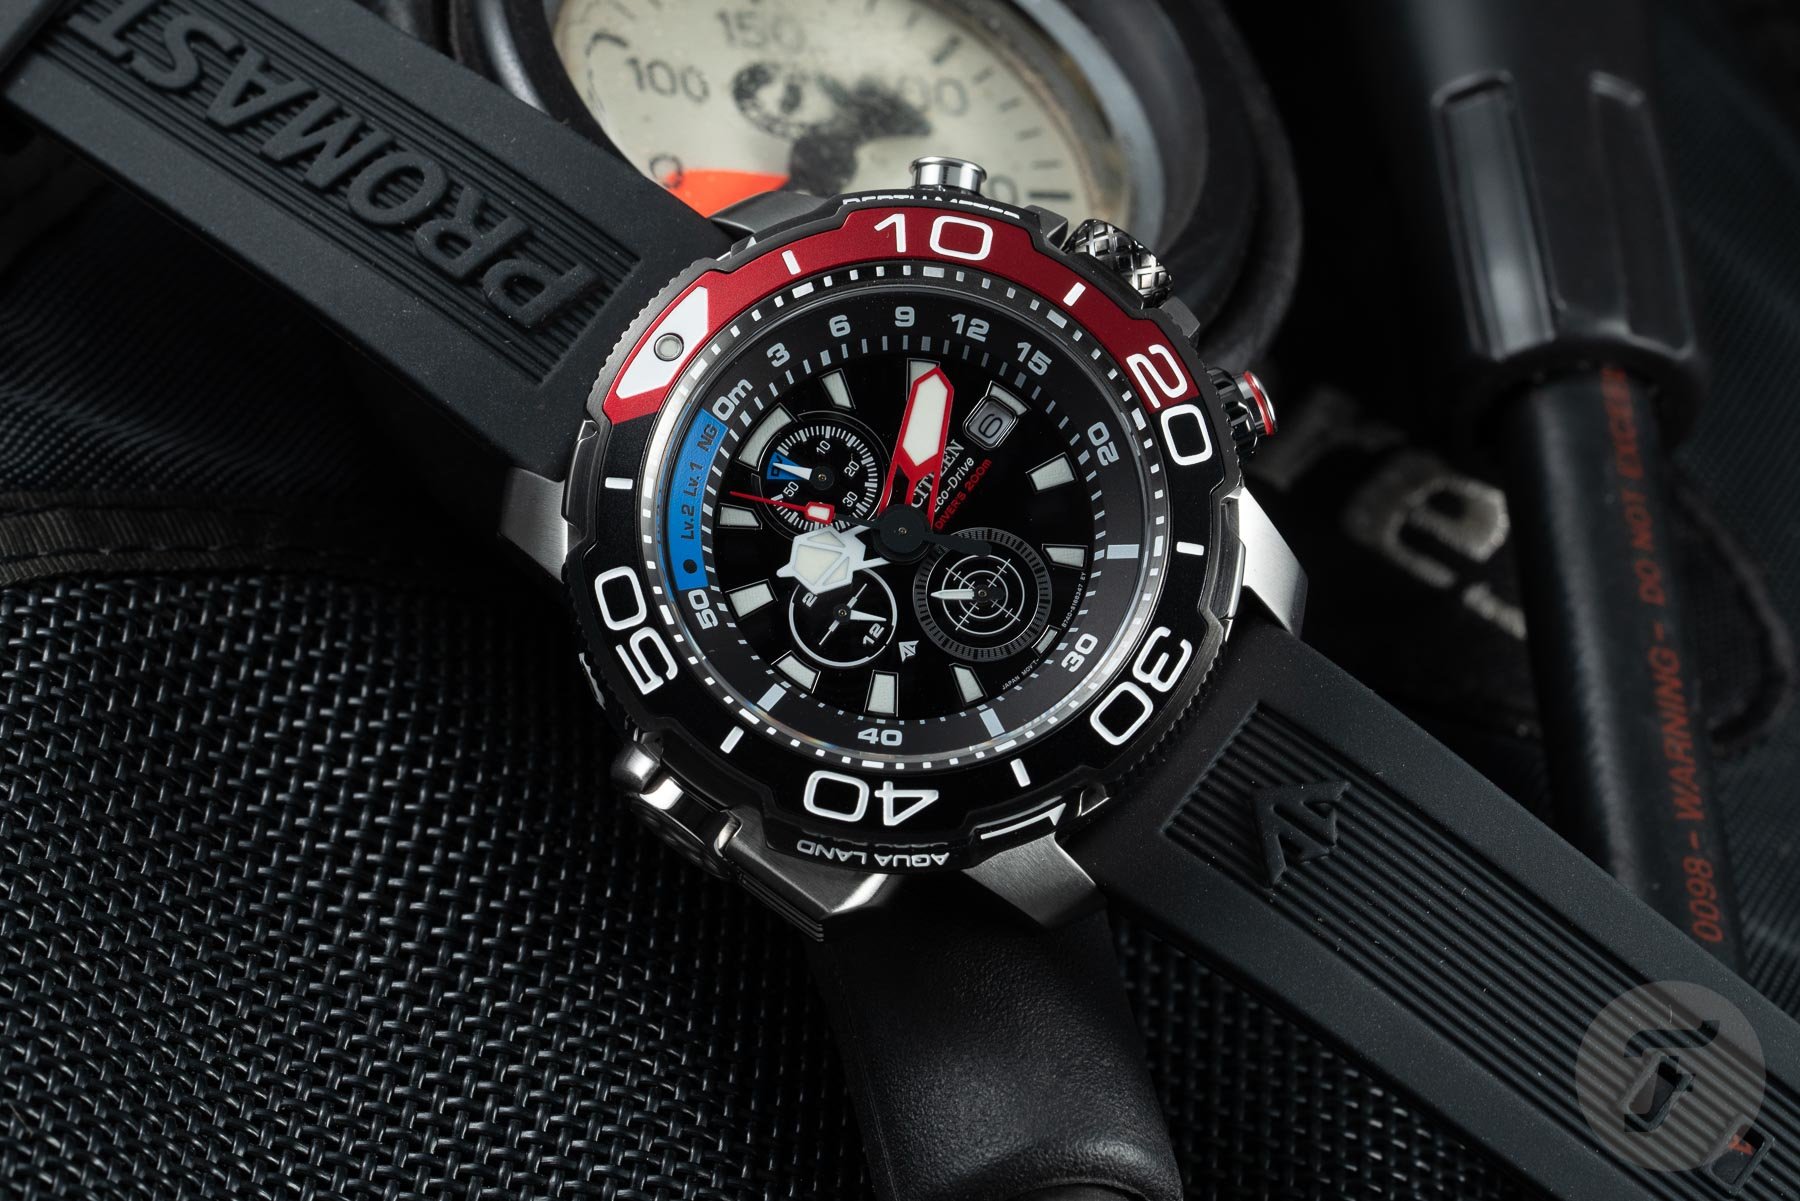 Citizen's Sundial: The ProMaster Diver Watch